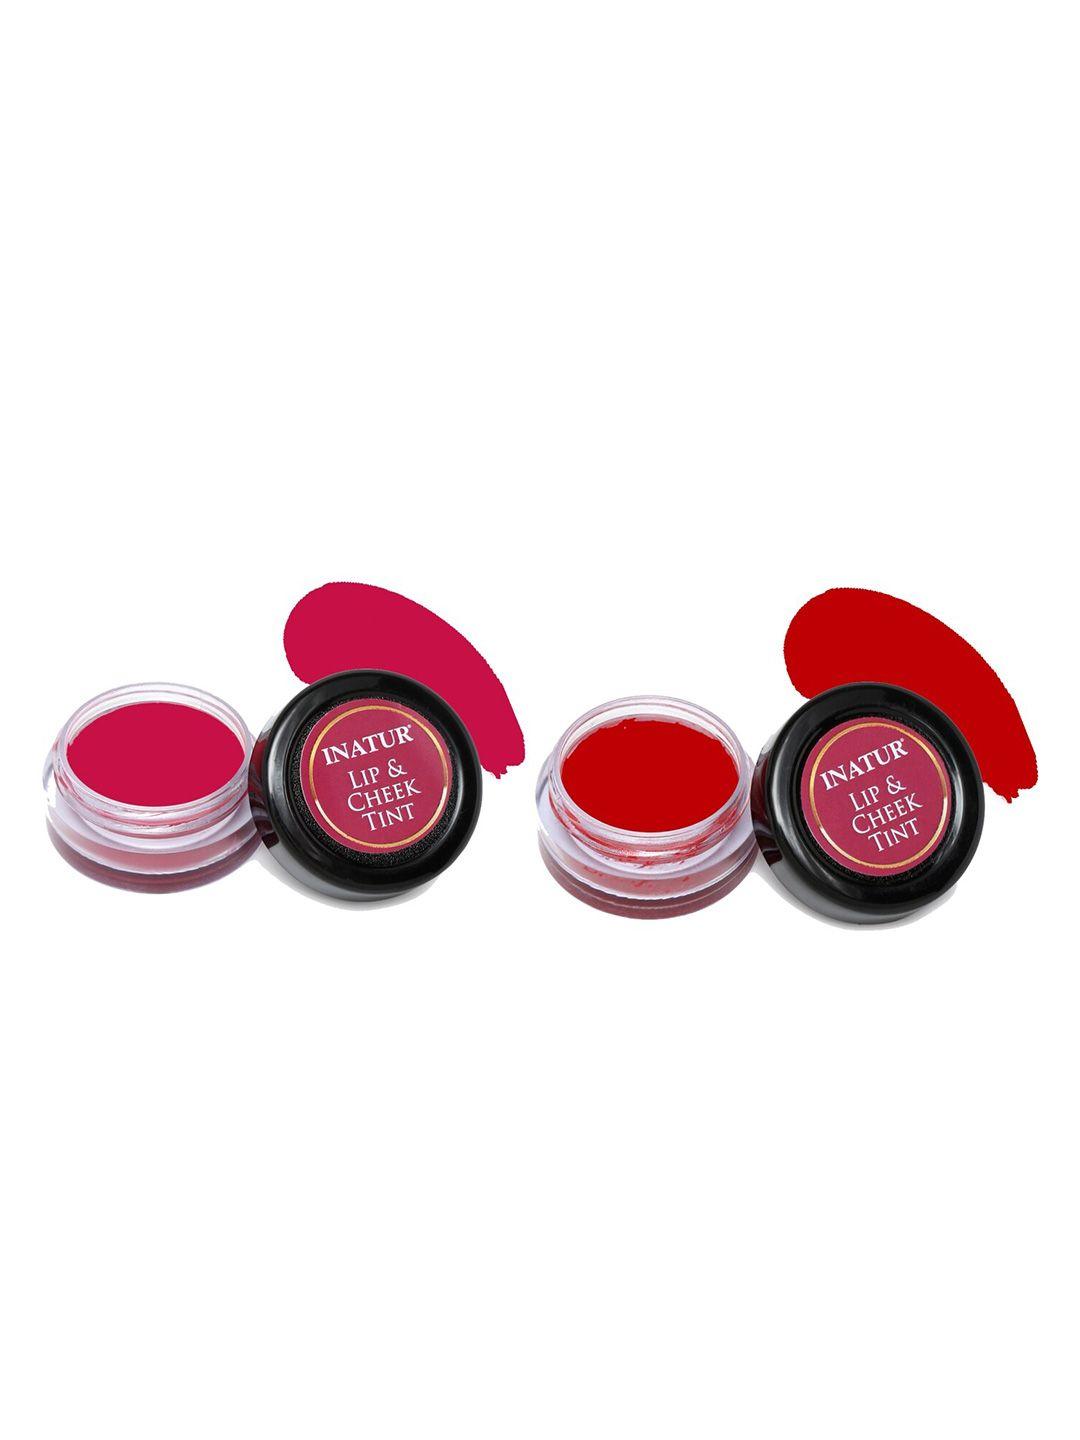 inatur set of 2 lip & cheek tint 8gm - coral and cherry